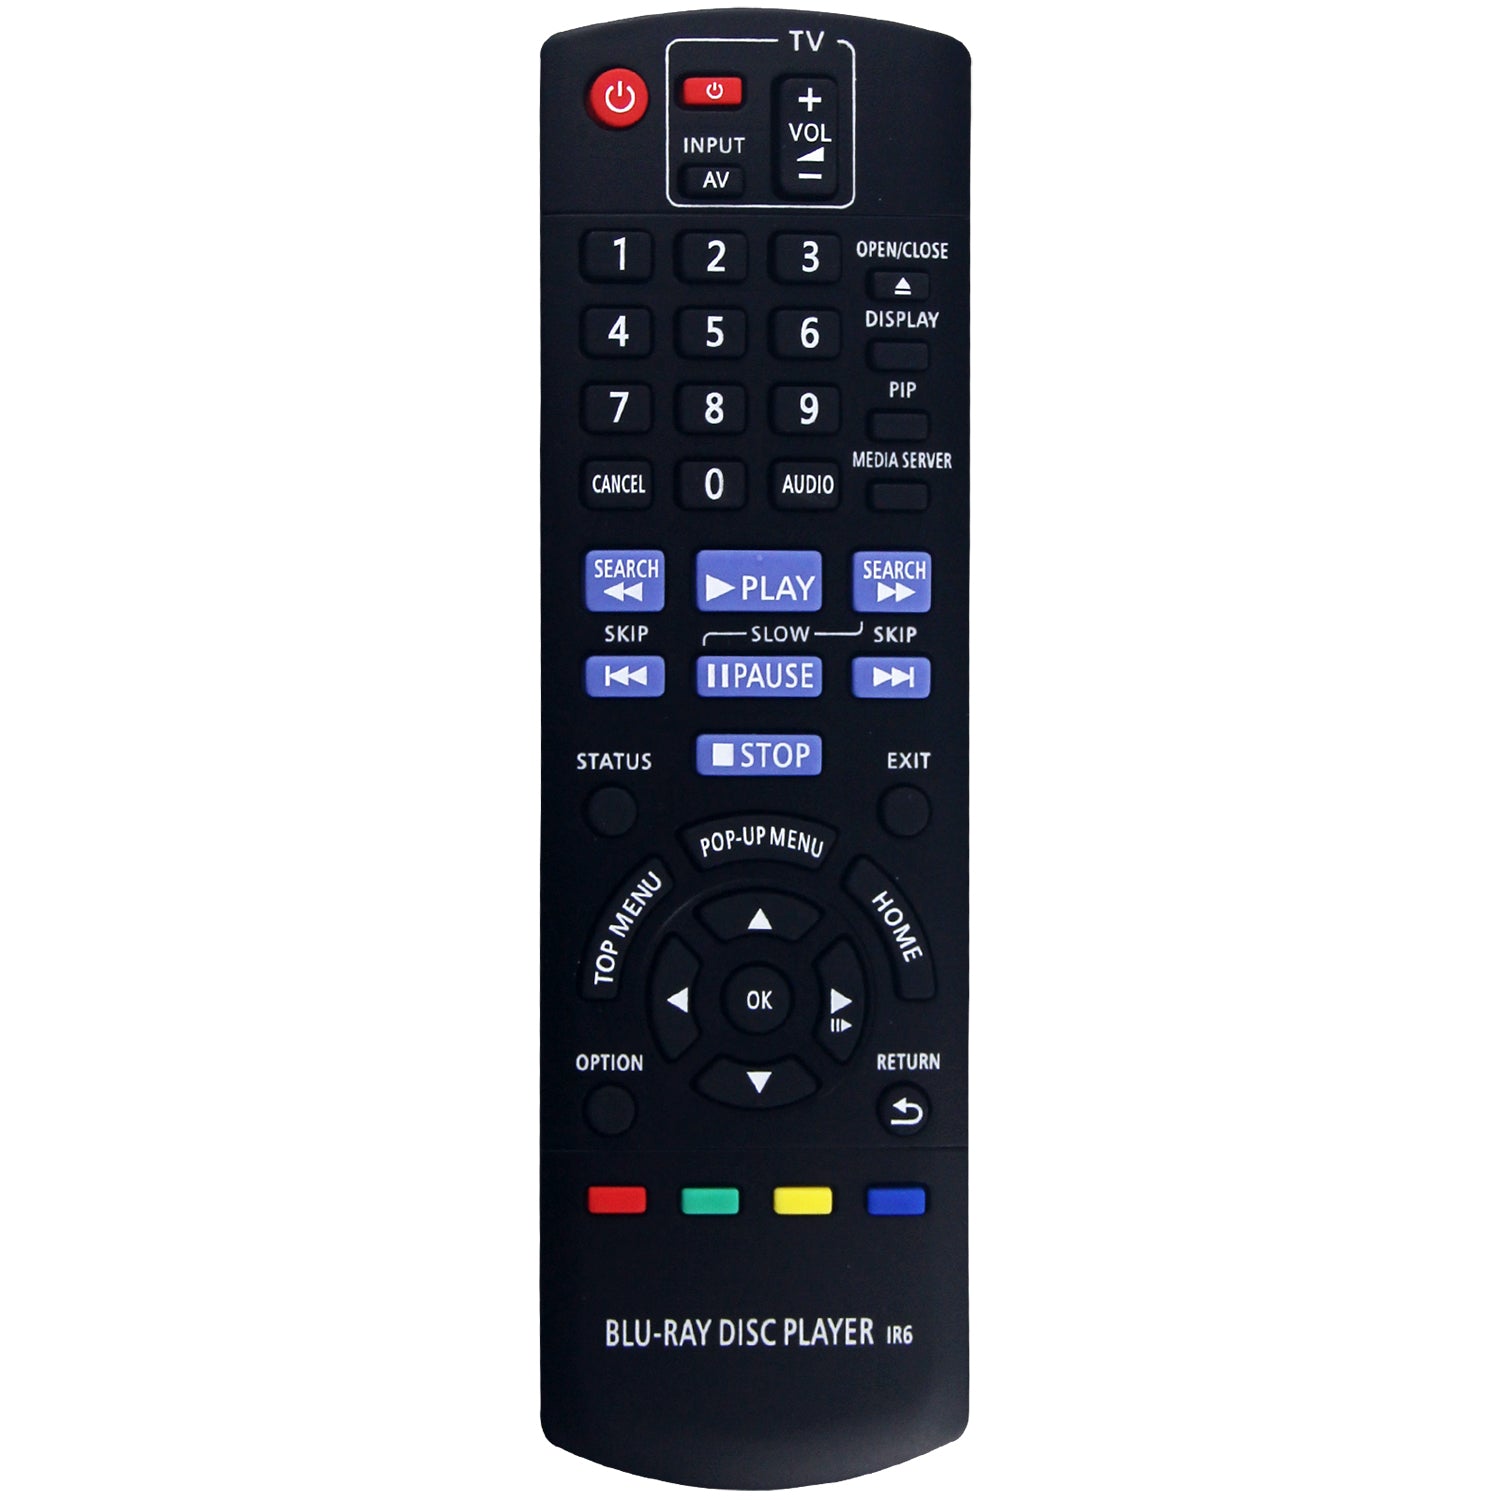 N2QAYB000577 Remote Control Replacement for Panasonic Blu-Ray Disc Player